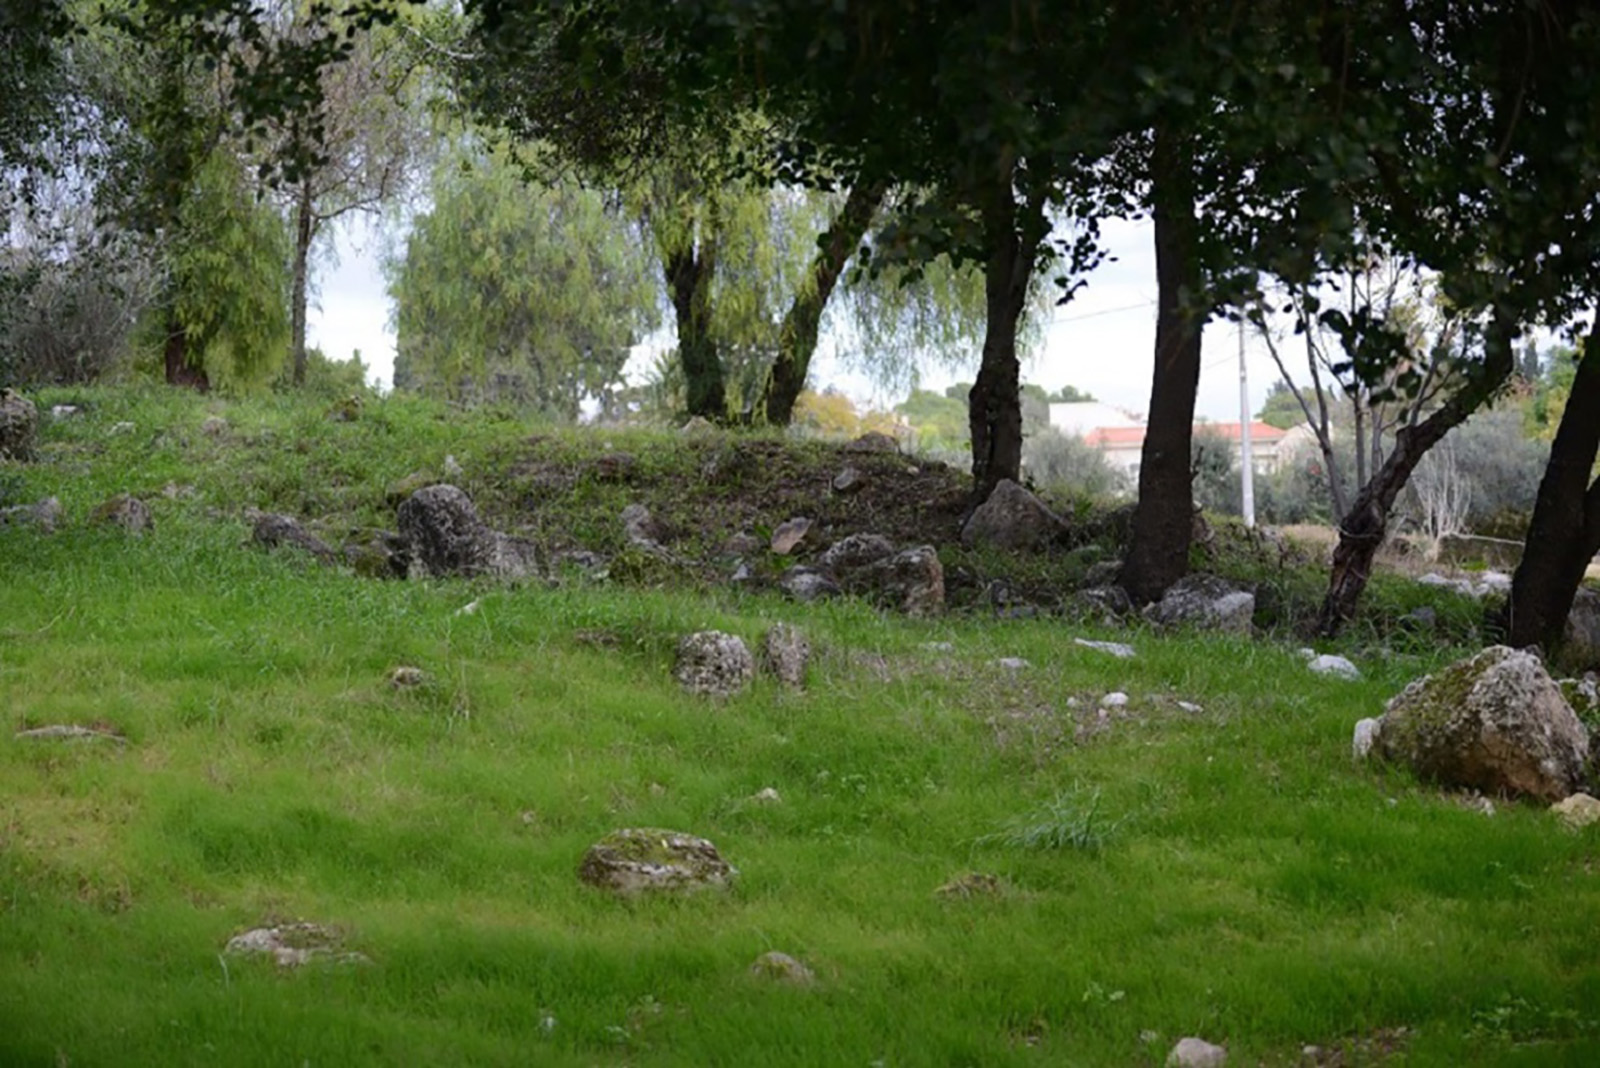 Remains of archaeology digging From the period of the byzant in bethlechem the galilee